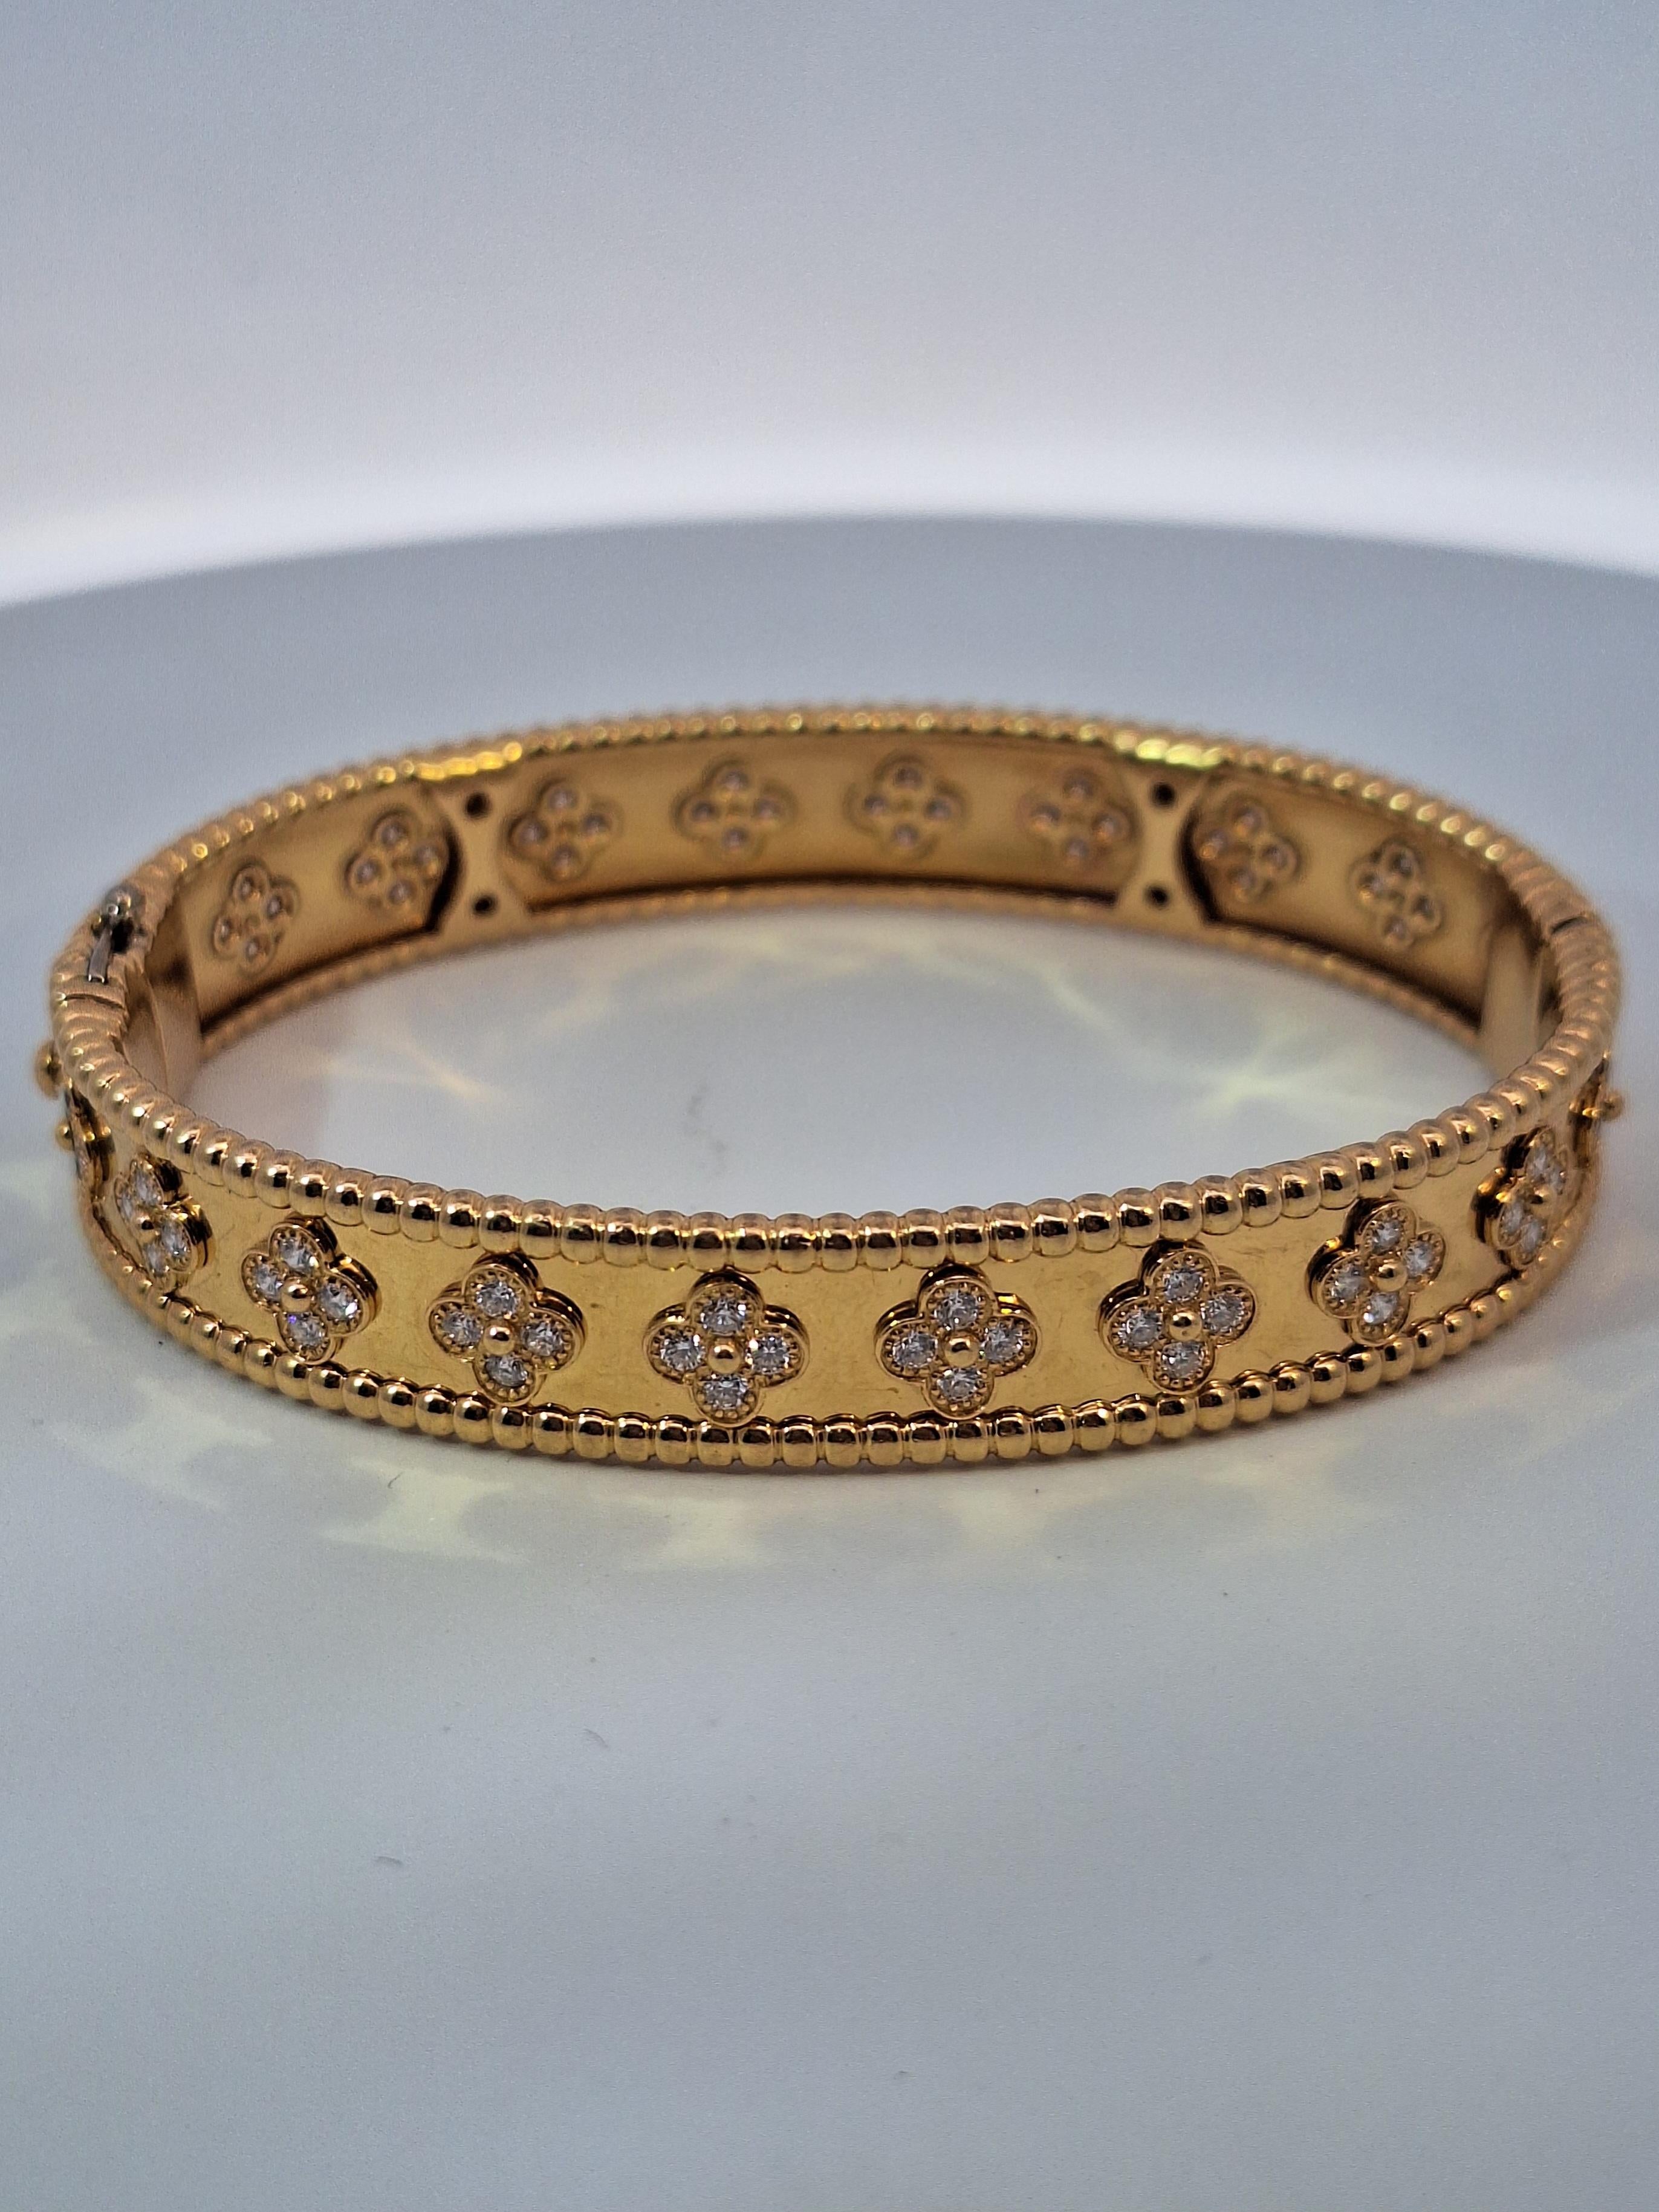 Van Cleef & Arpels 18Kt Yellow Gold Perlee Diamond Bangle Size Medium In Excellent Condition For Sale In New York, NY